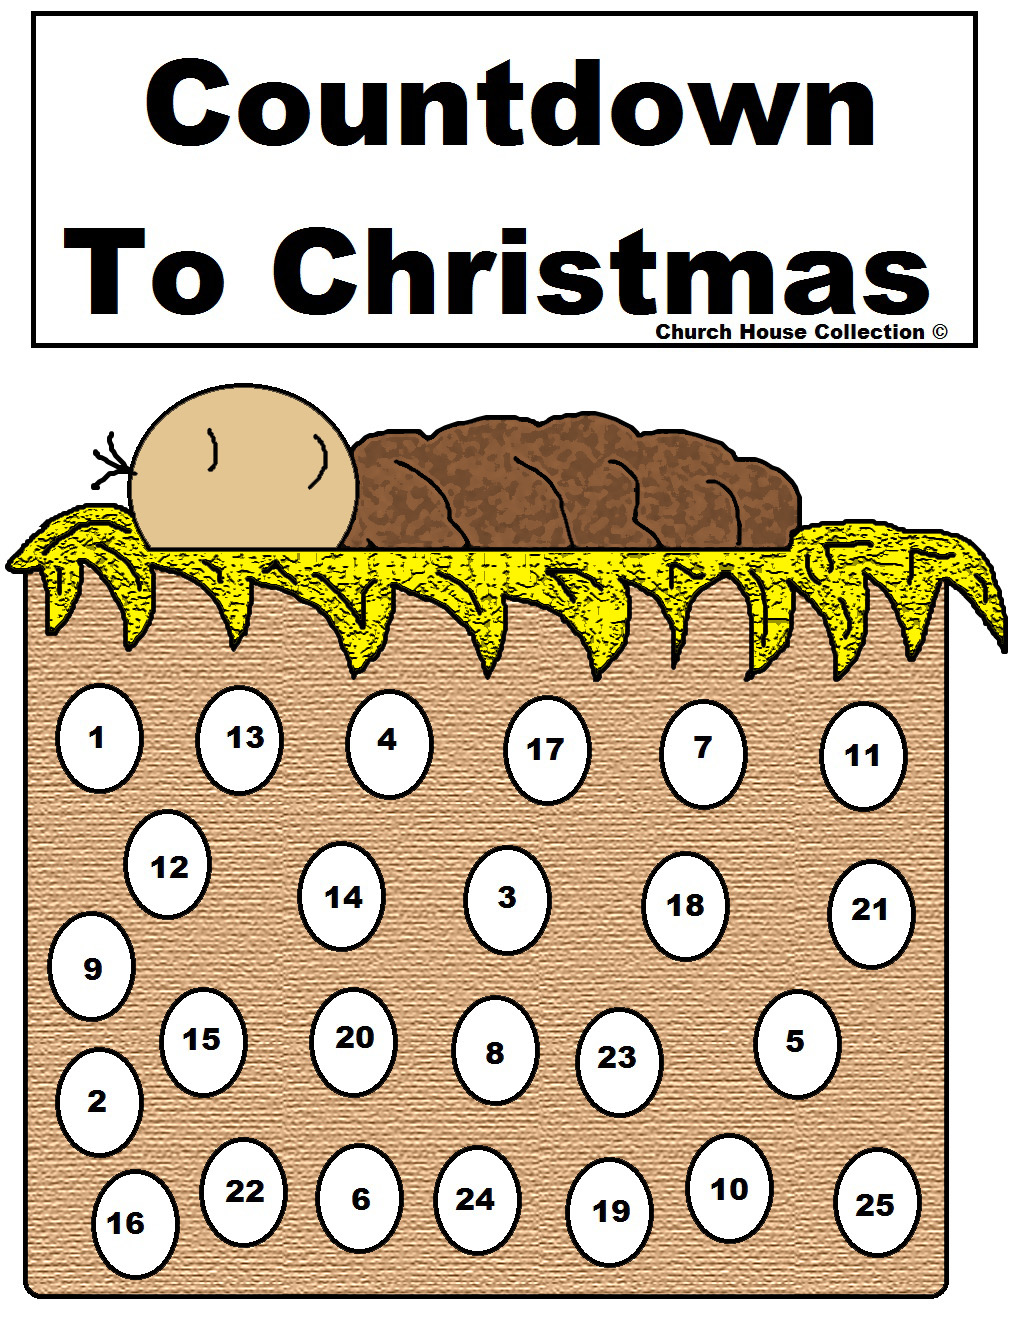 Download Church House Collection Blog: Baby Jesus Advent Calendar For Christmas